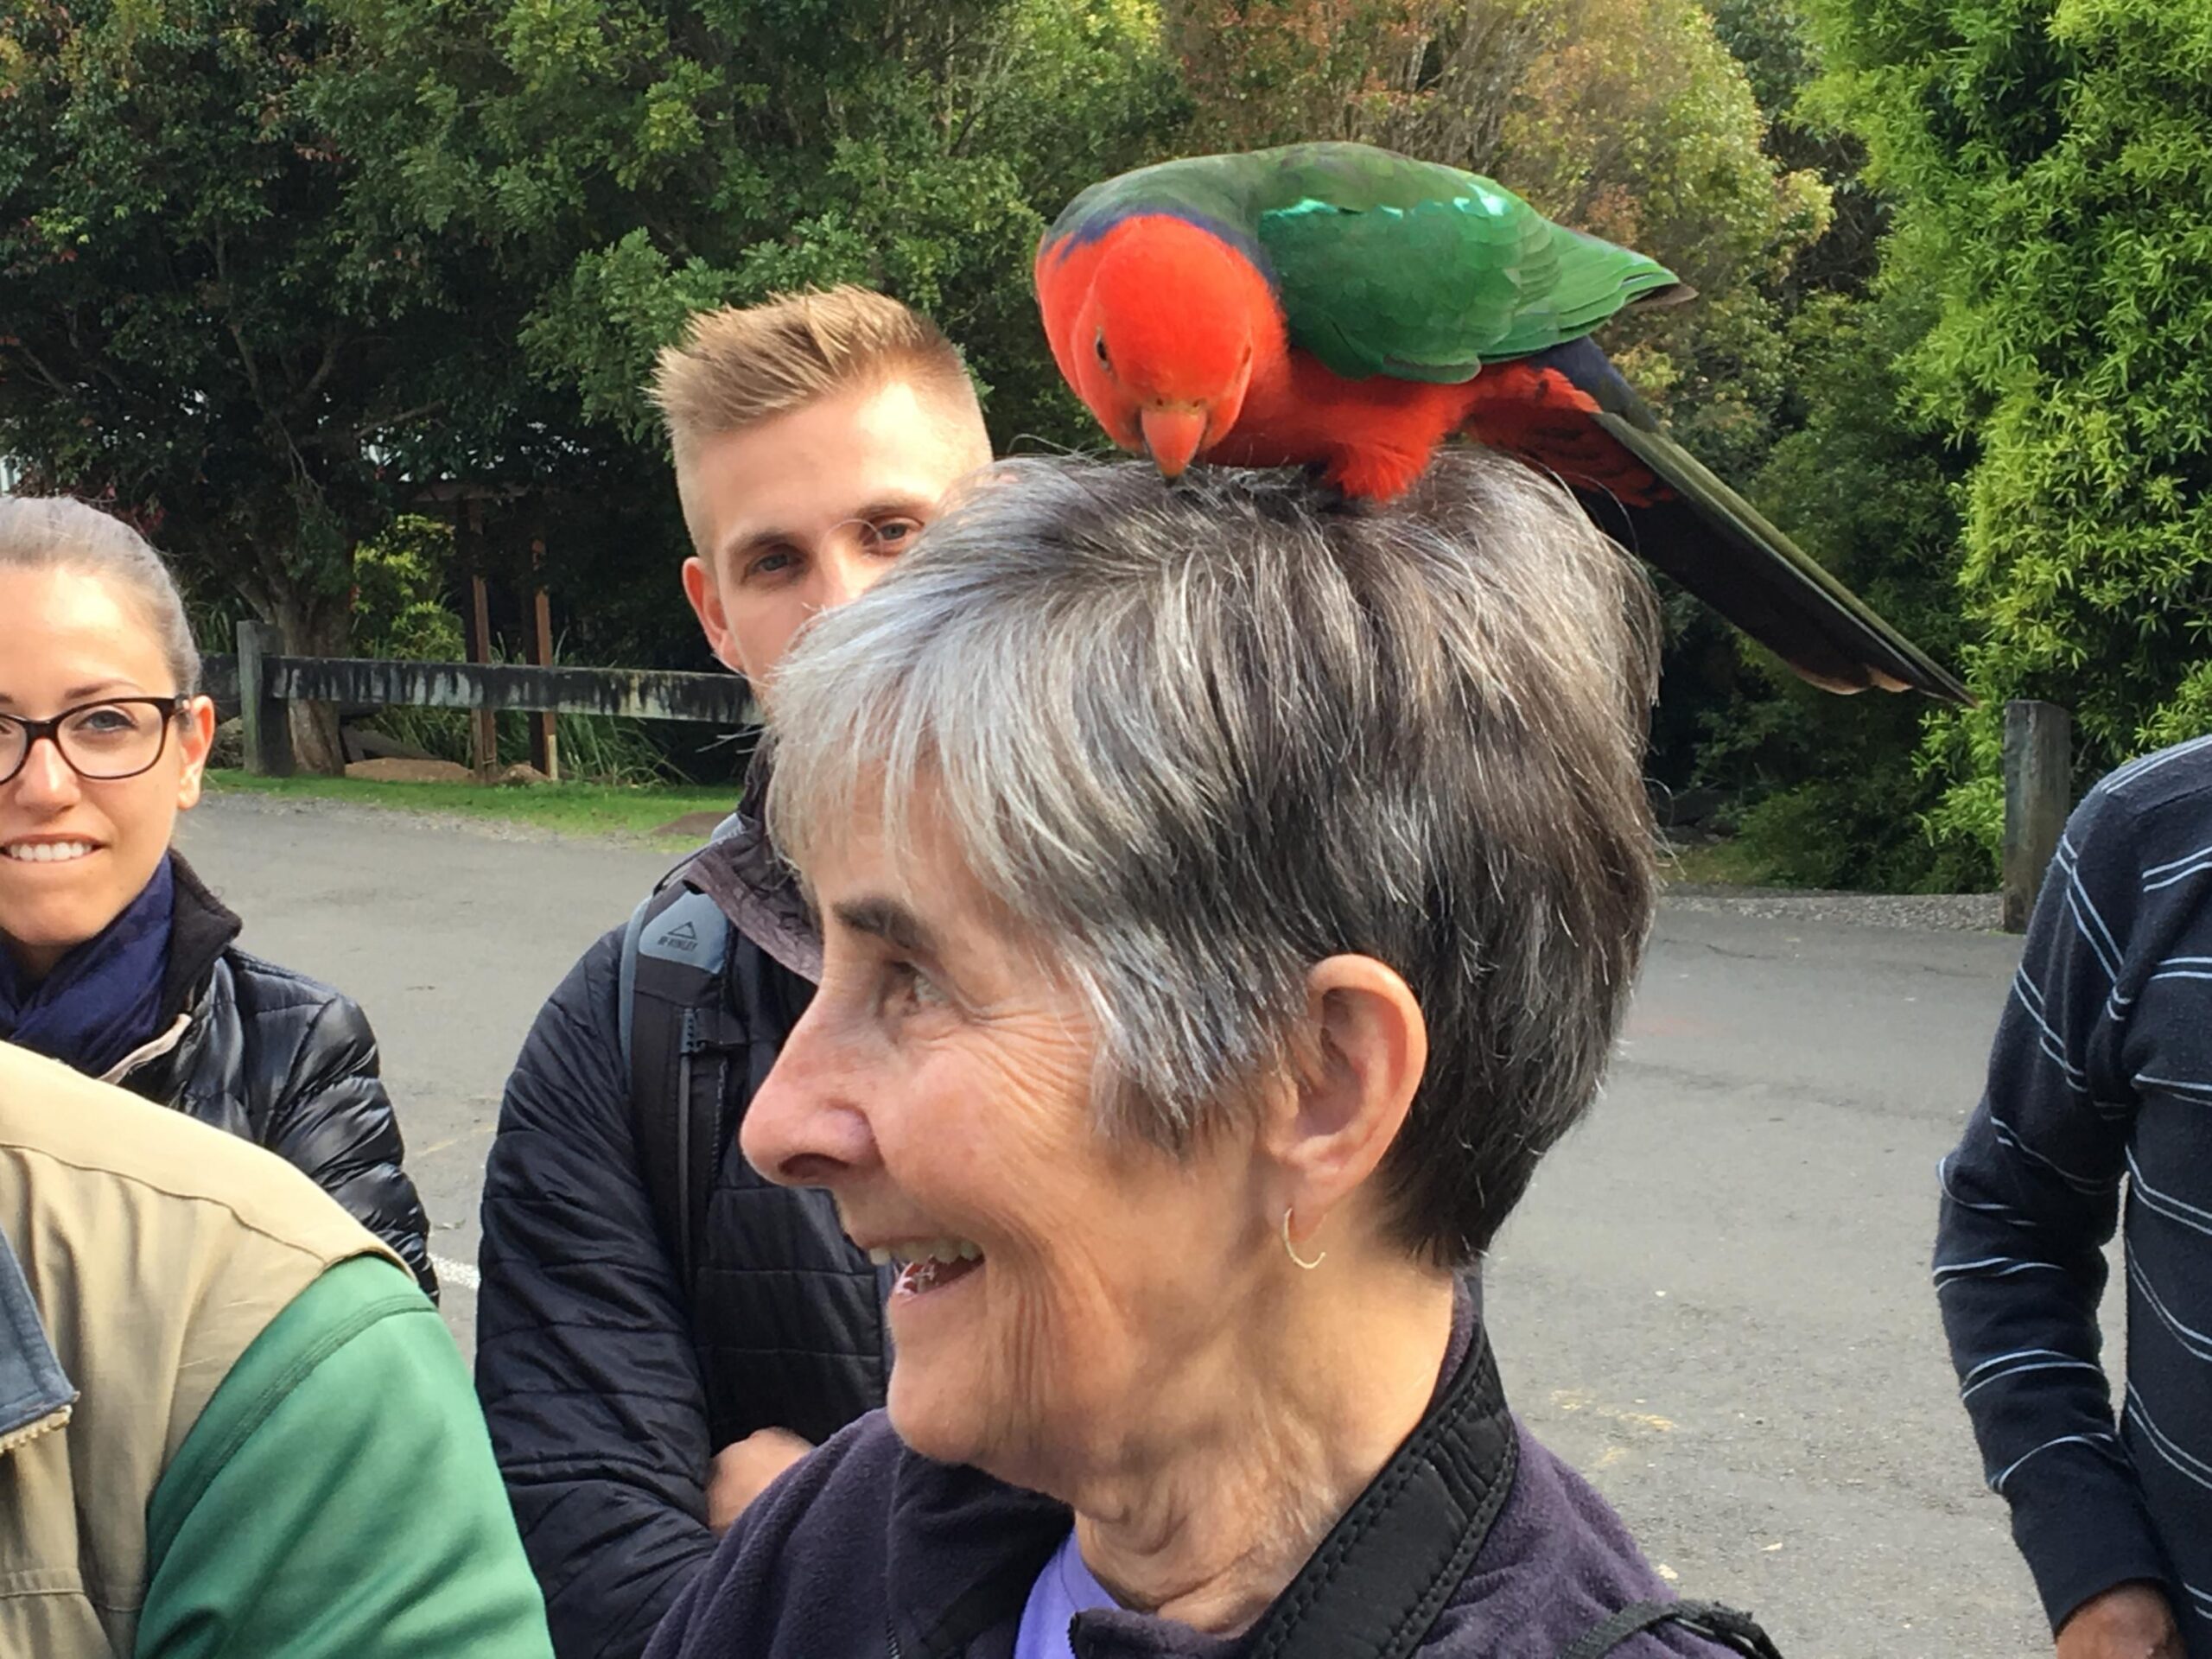 King Parrot on Jude's head - photo by Allen Rieland